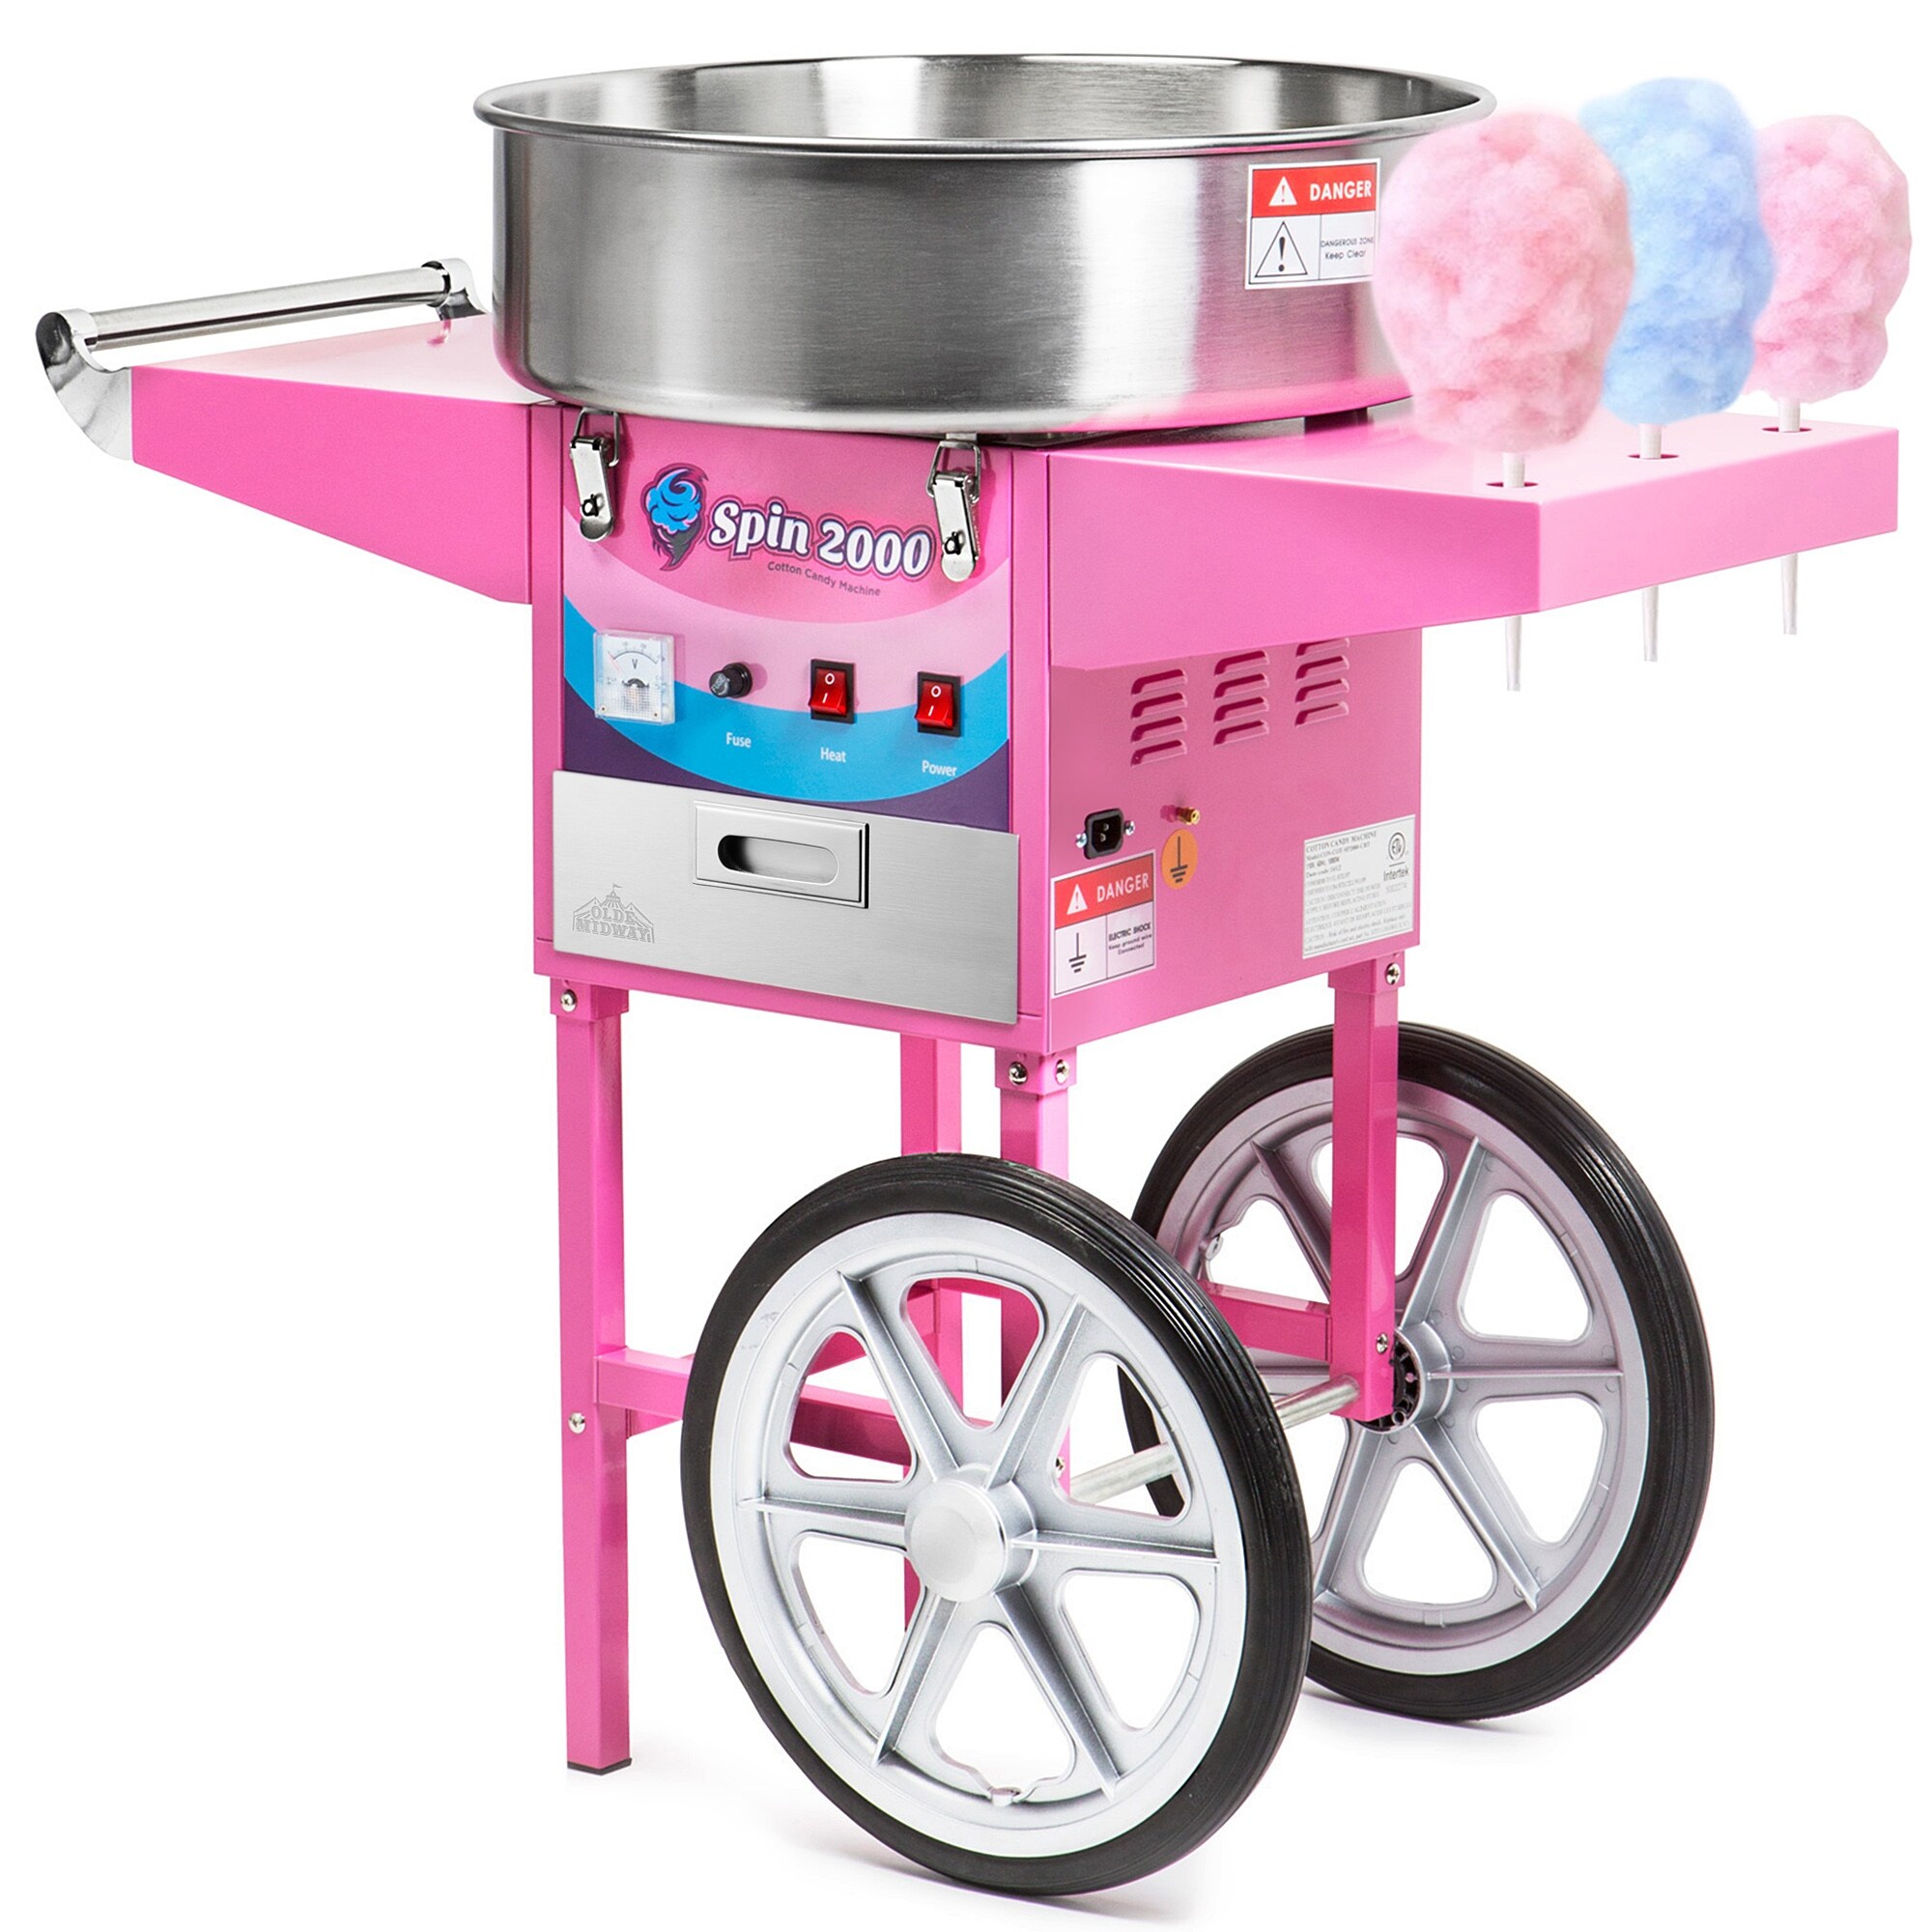 Iglobalbuy Candy Floss Machine,1300W electric Candy Cotton Maker Pink 